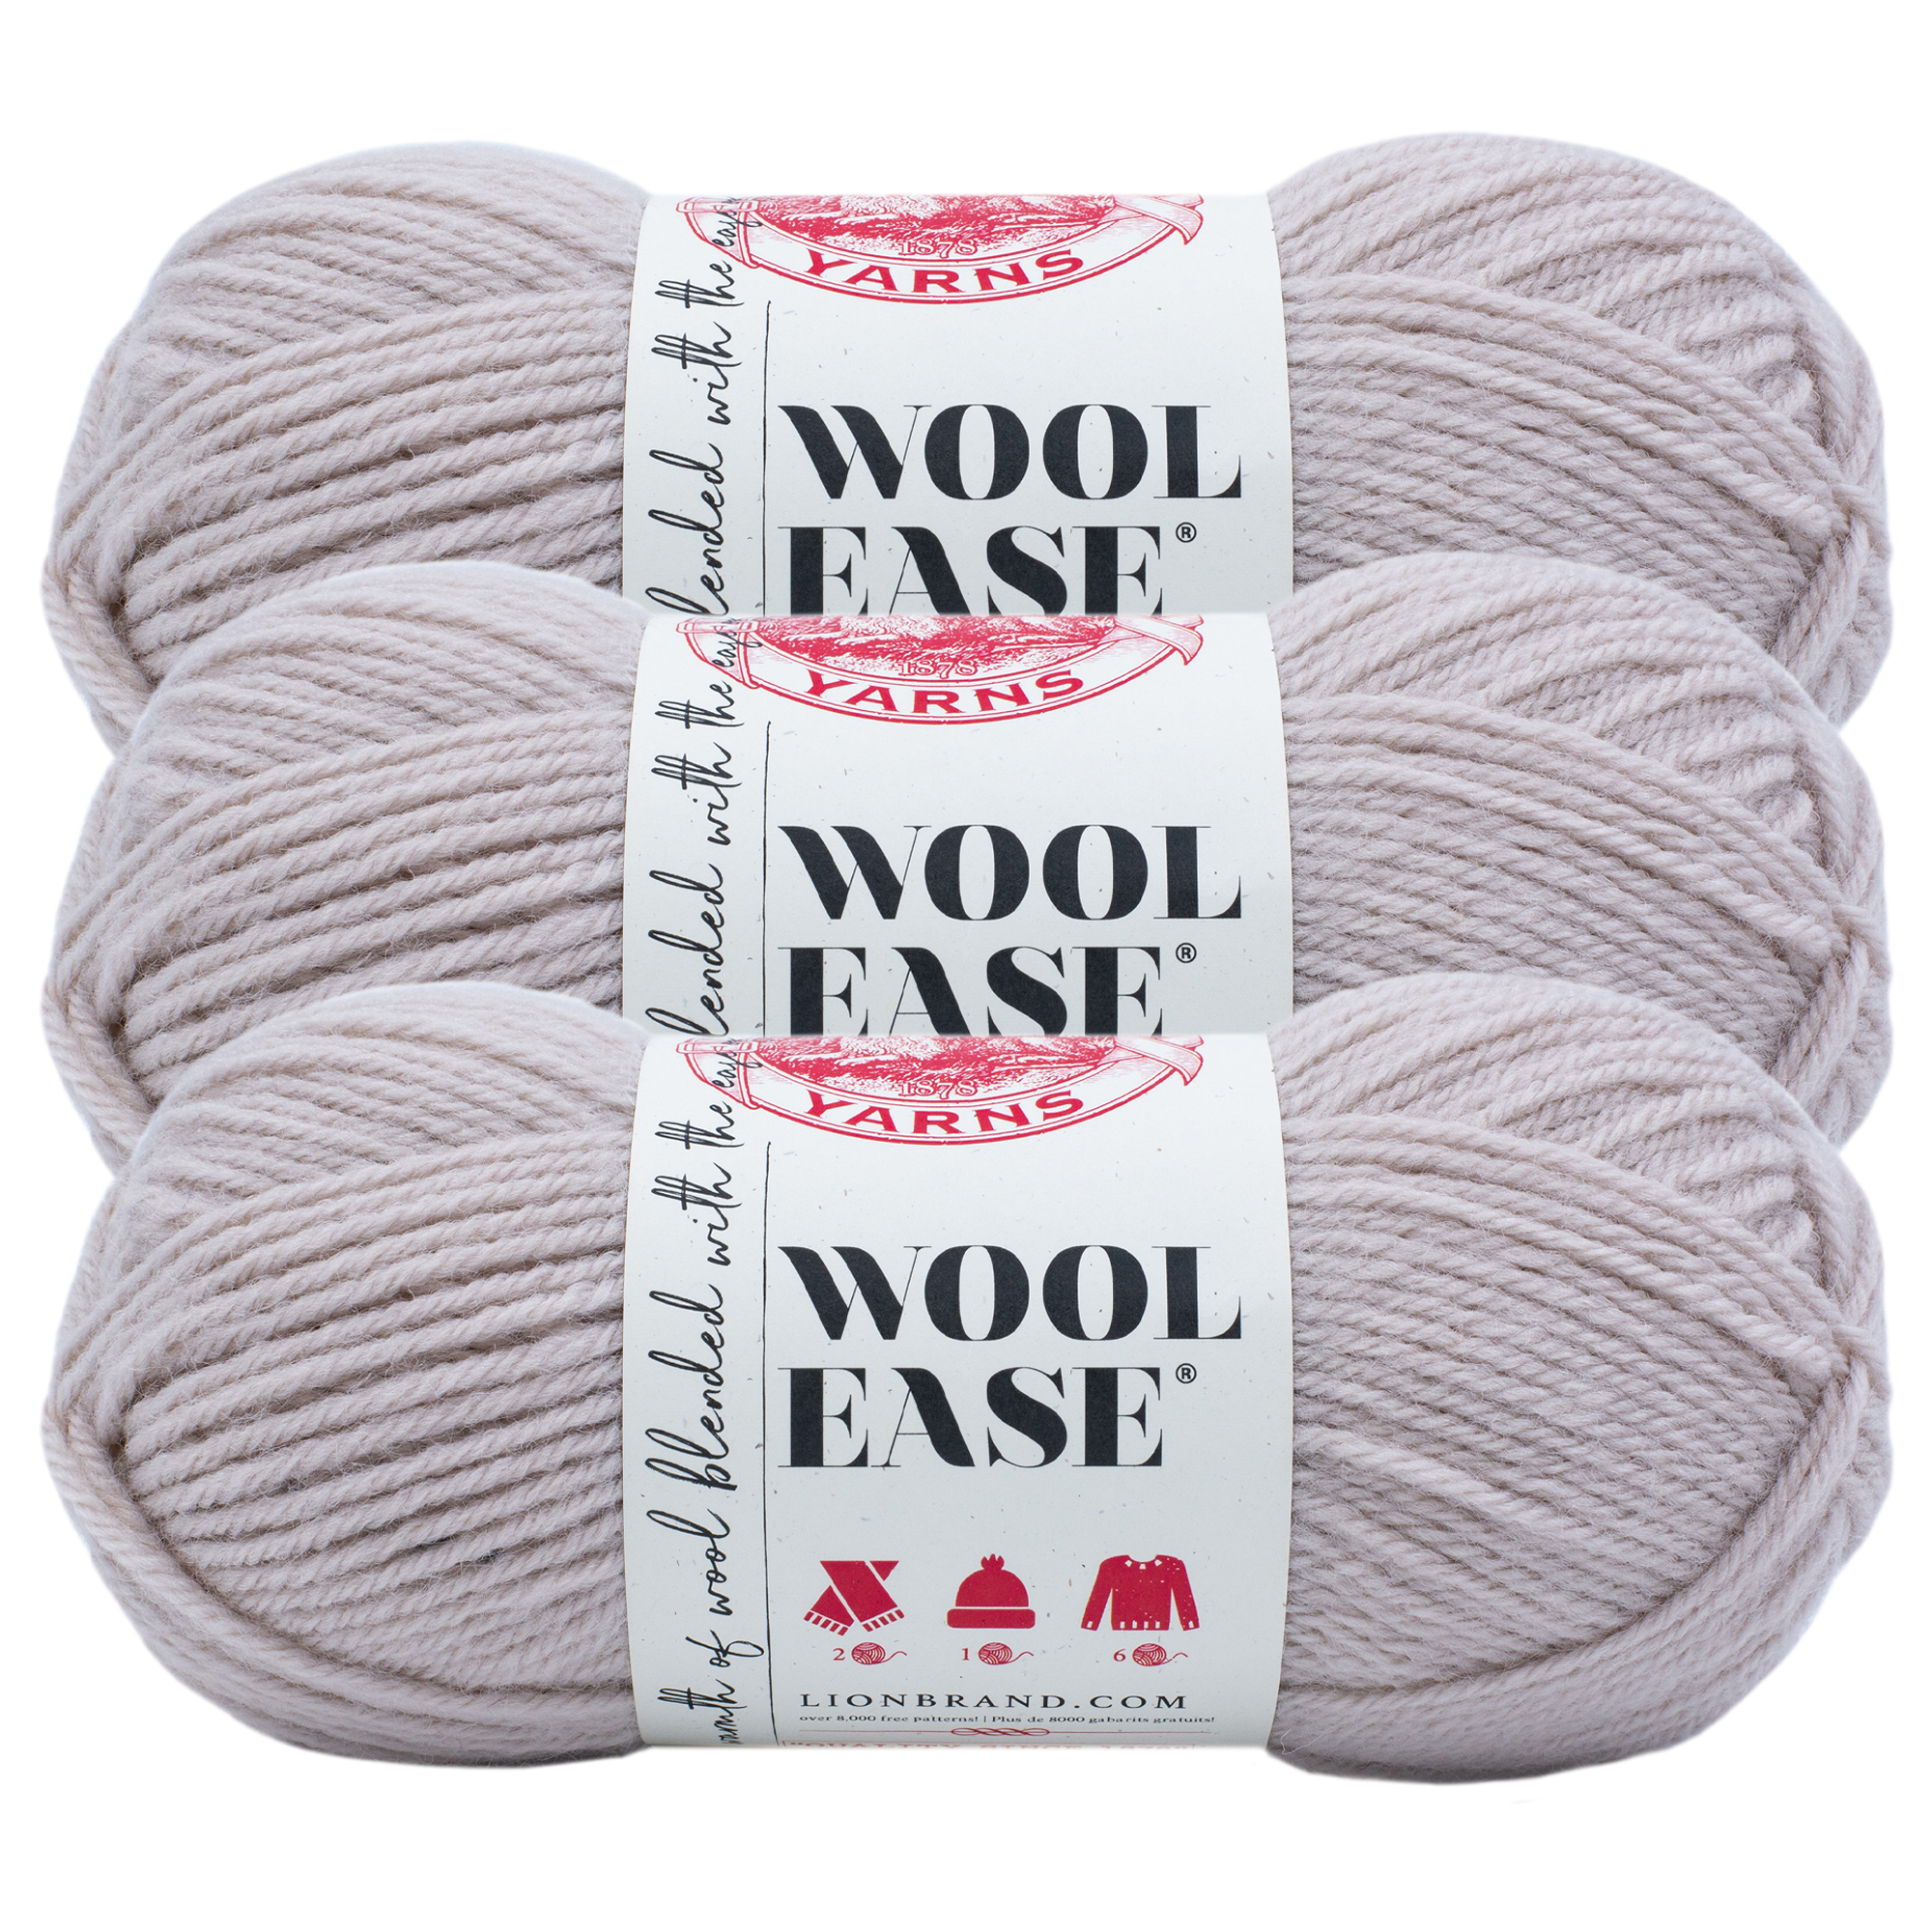 Lion Brand Yarn Wool-Ease Antler Classic Worsted Medium Acrylic, Wool Off-White Yarn 3 Pack - image 1 of 4